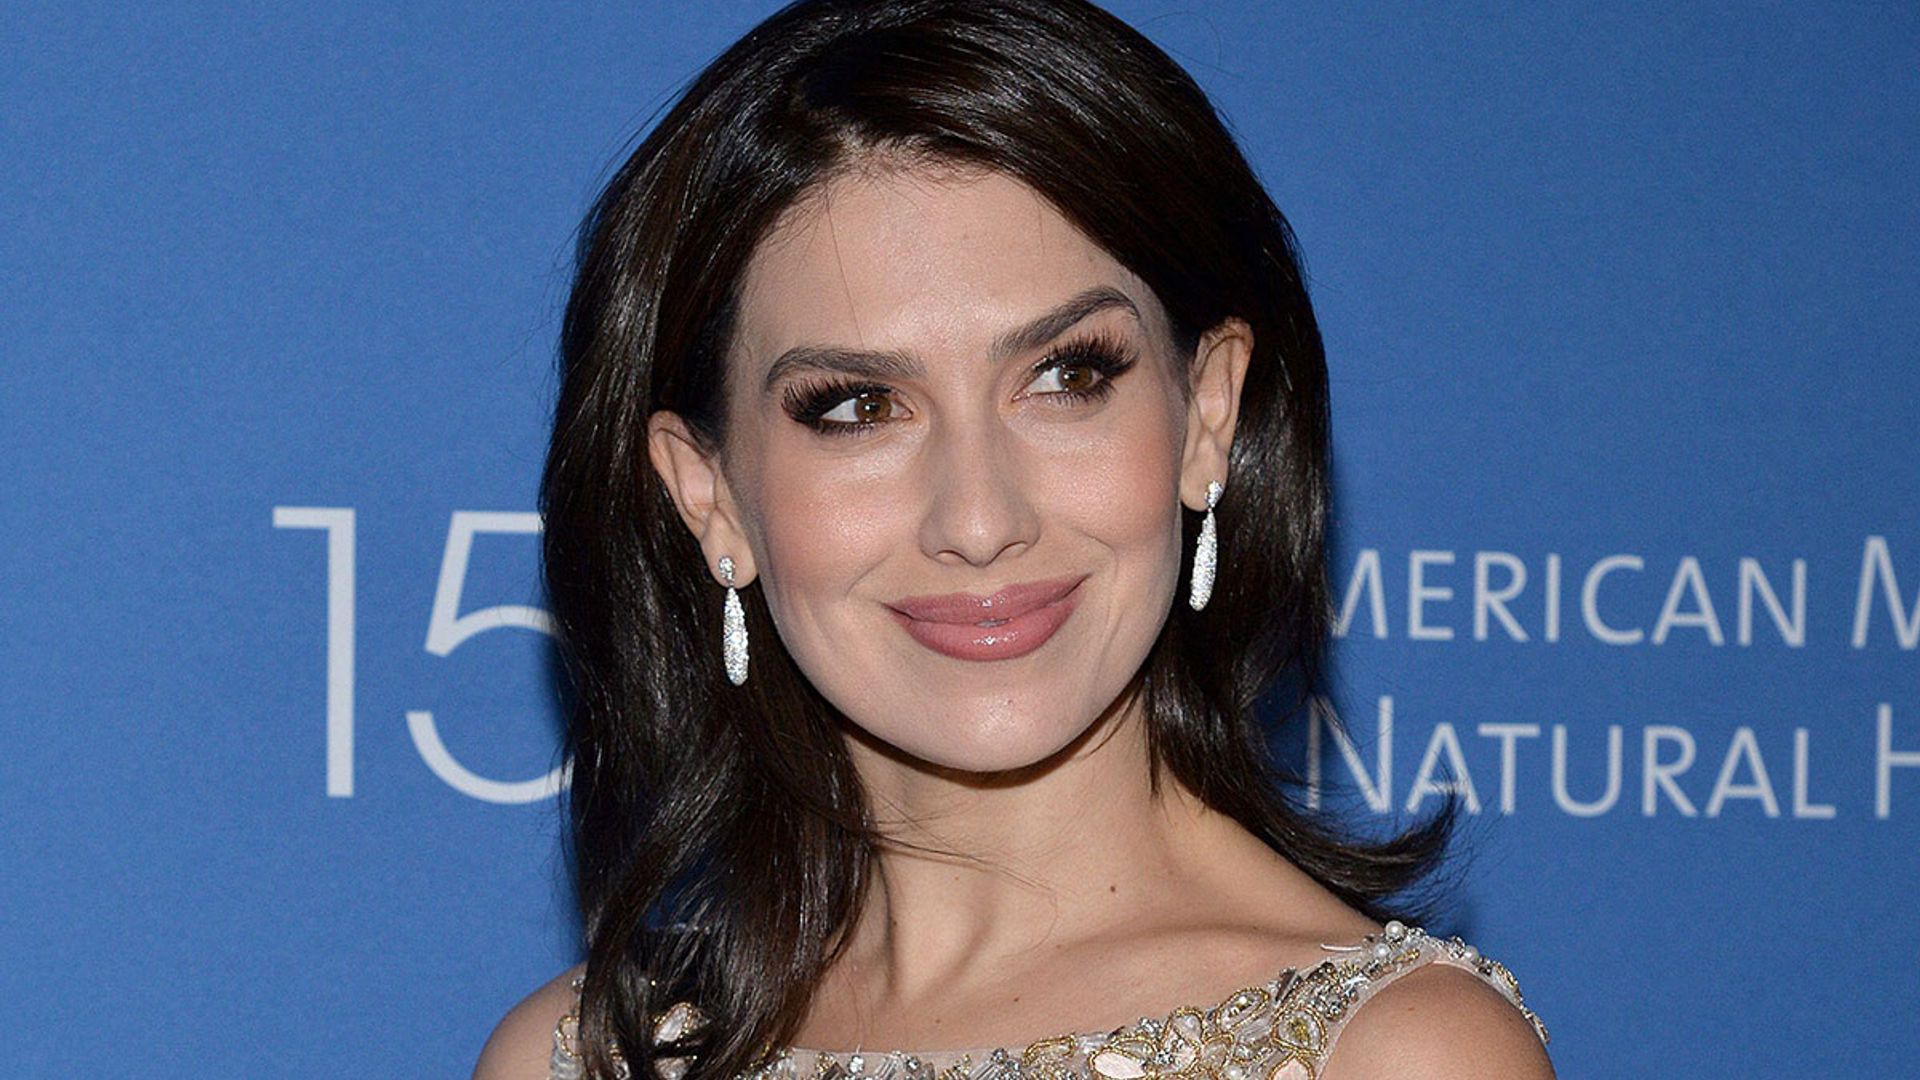 Hilaria Baldwin shares sweet photo of her children in matching outfits